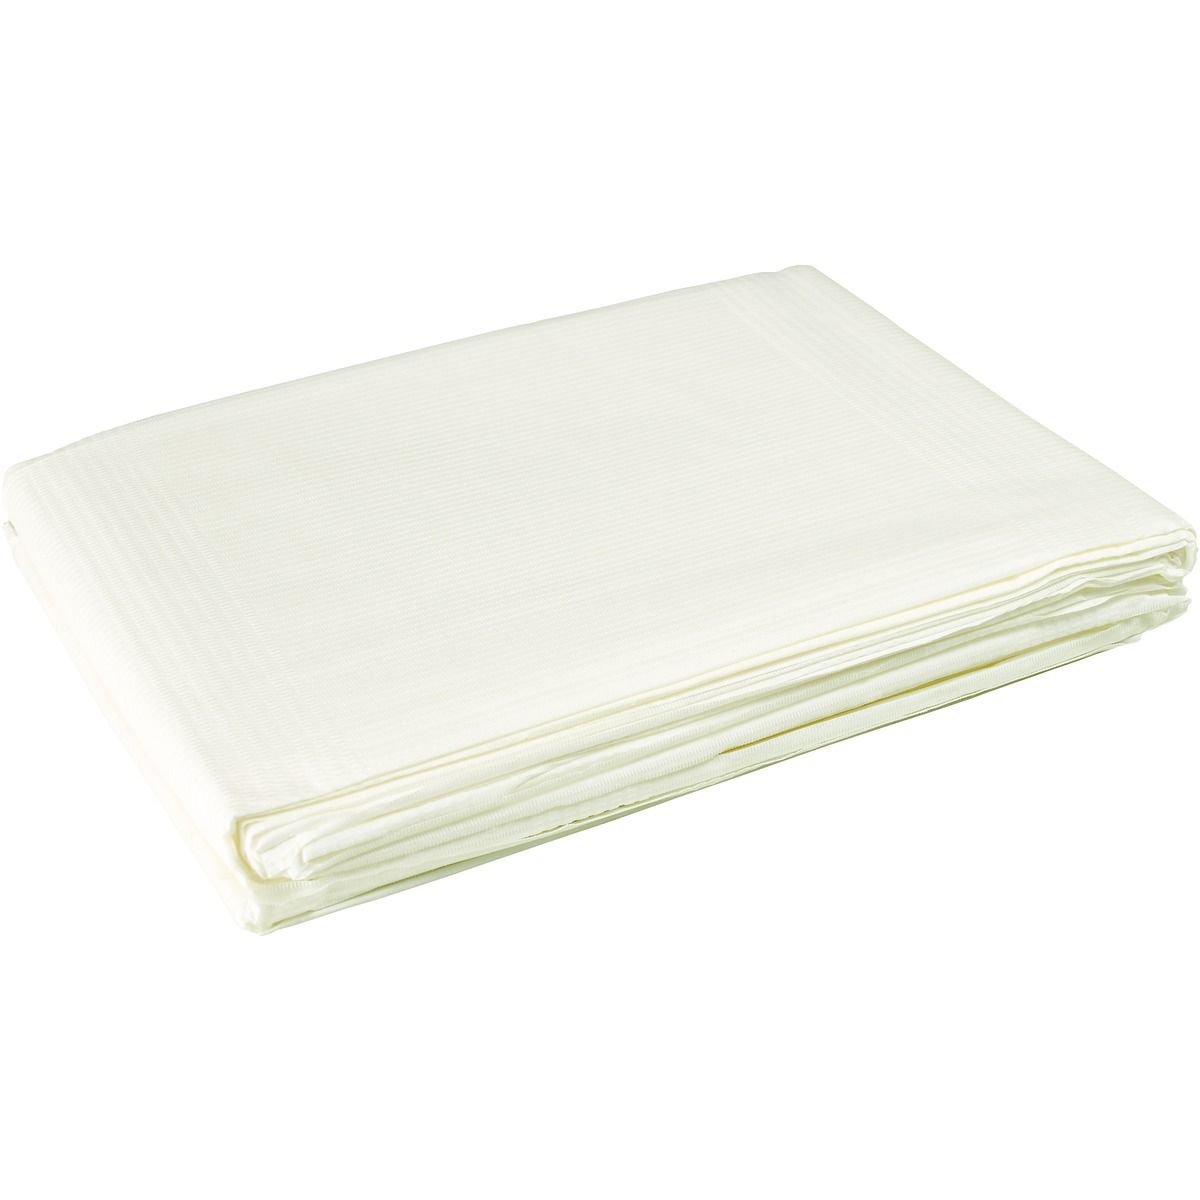 Image of Absorbent Polythene Dust Sheet - 2.7 x 3.6m